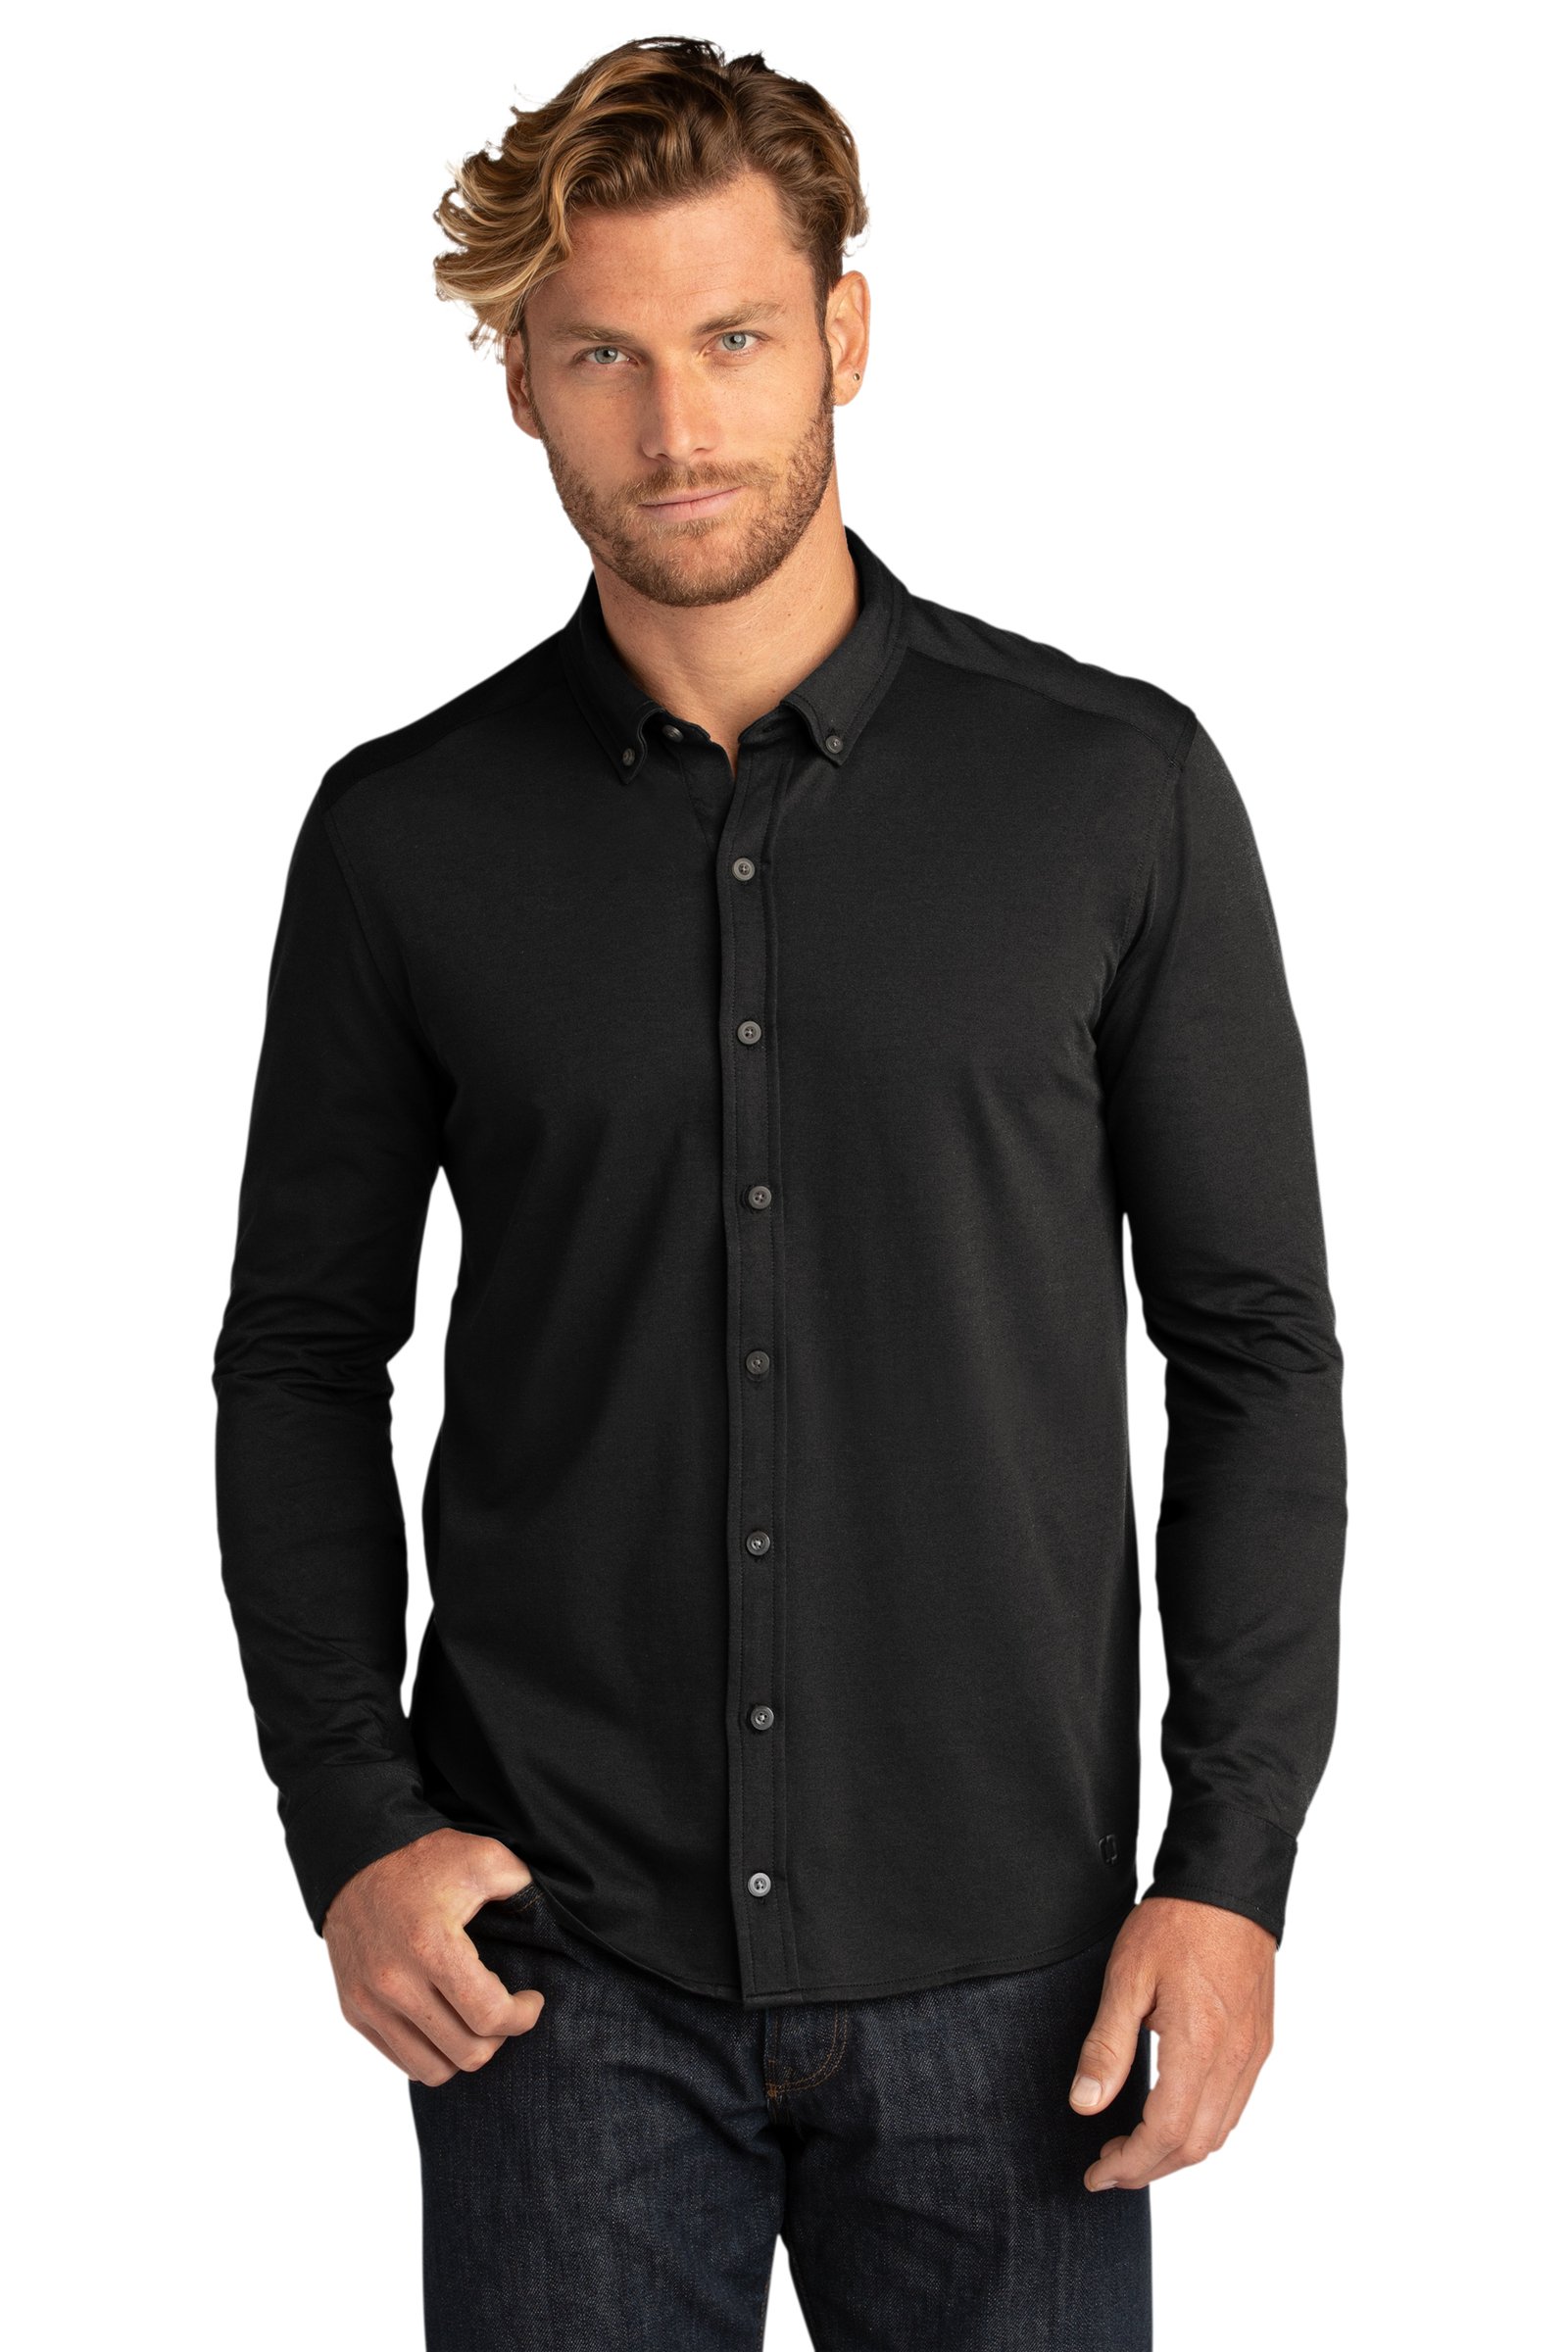 OGIO Embroidered Code Stretch Long Sleeve Button-Up